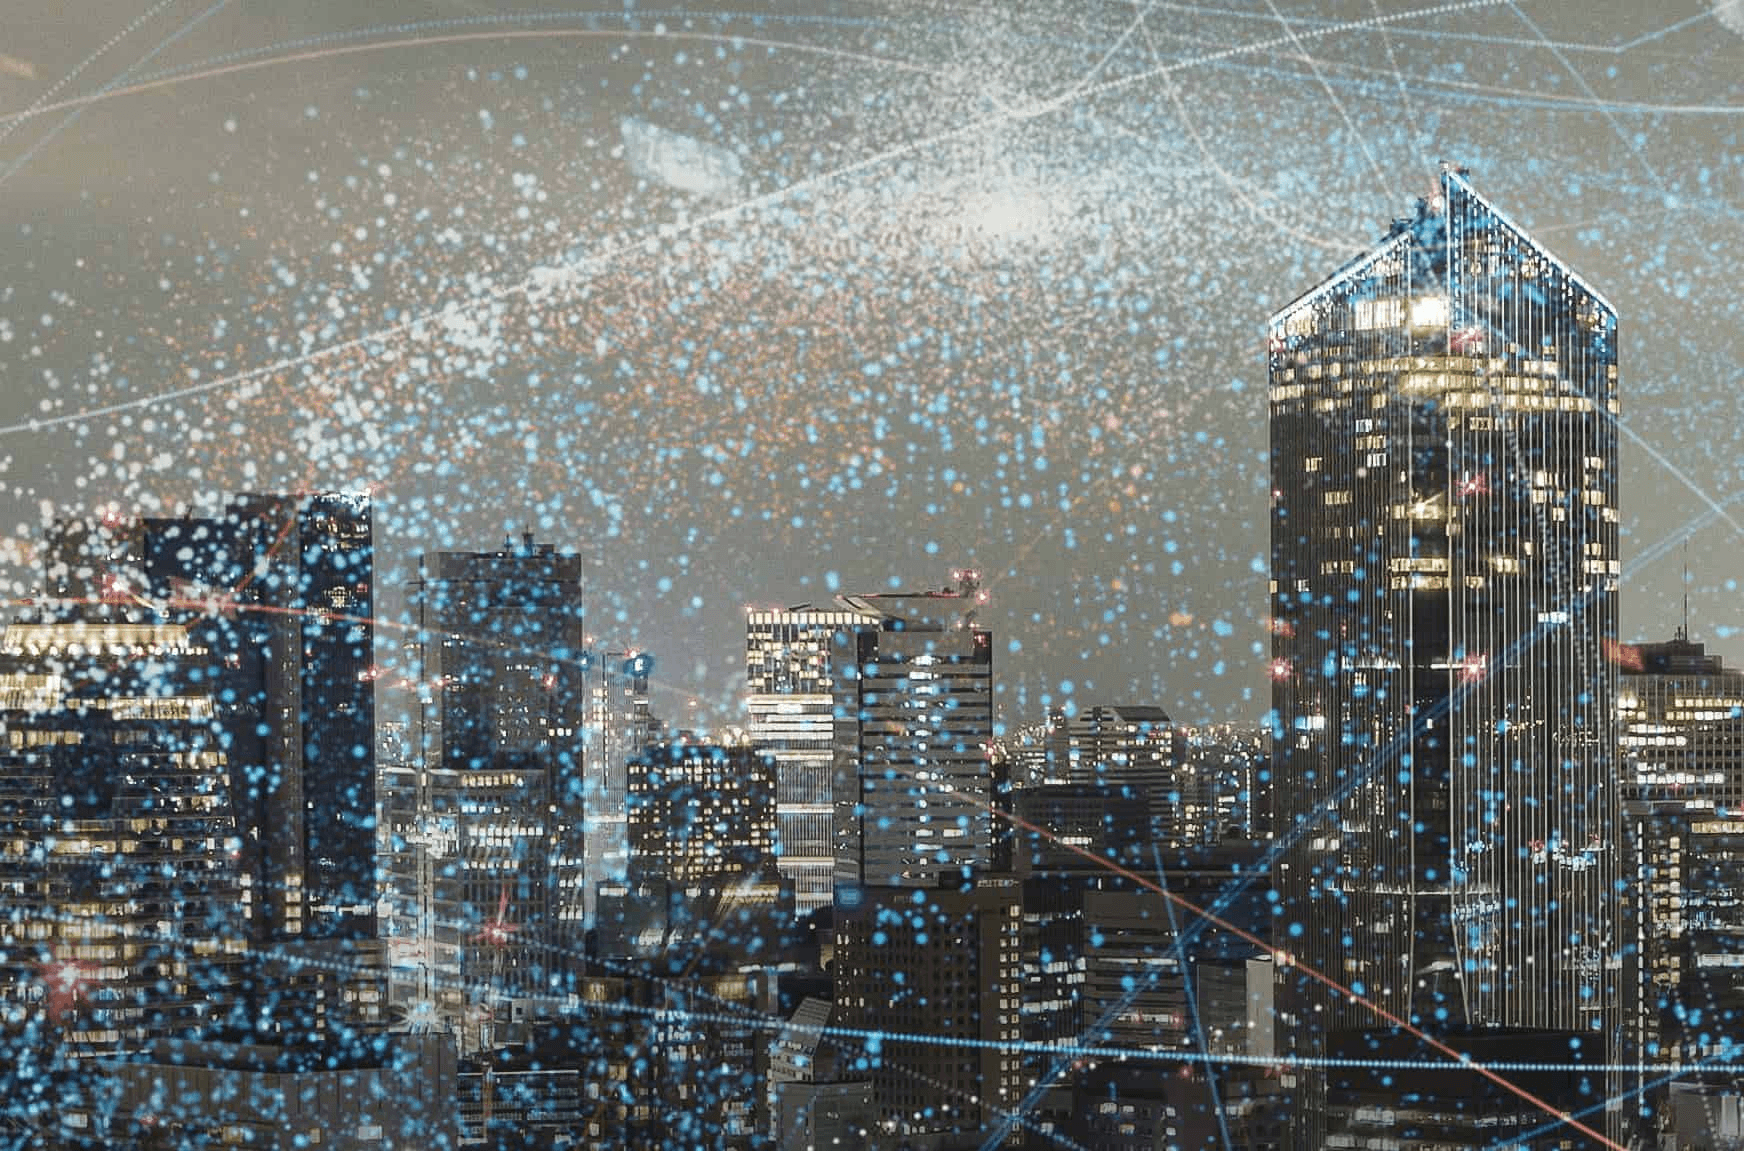 A digital composite image of a city skyline at night with overlaid futuristic network connections and glowing dots.